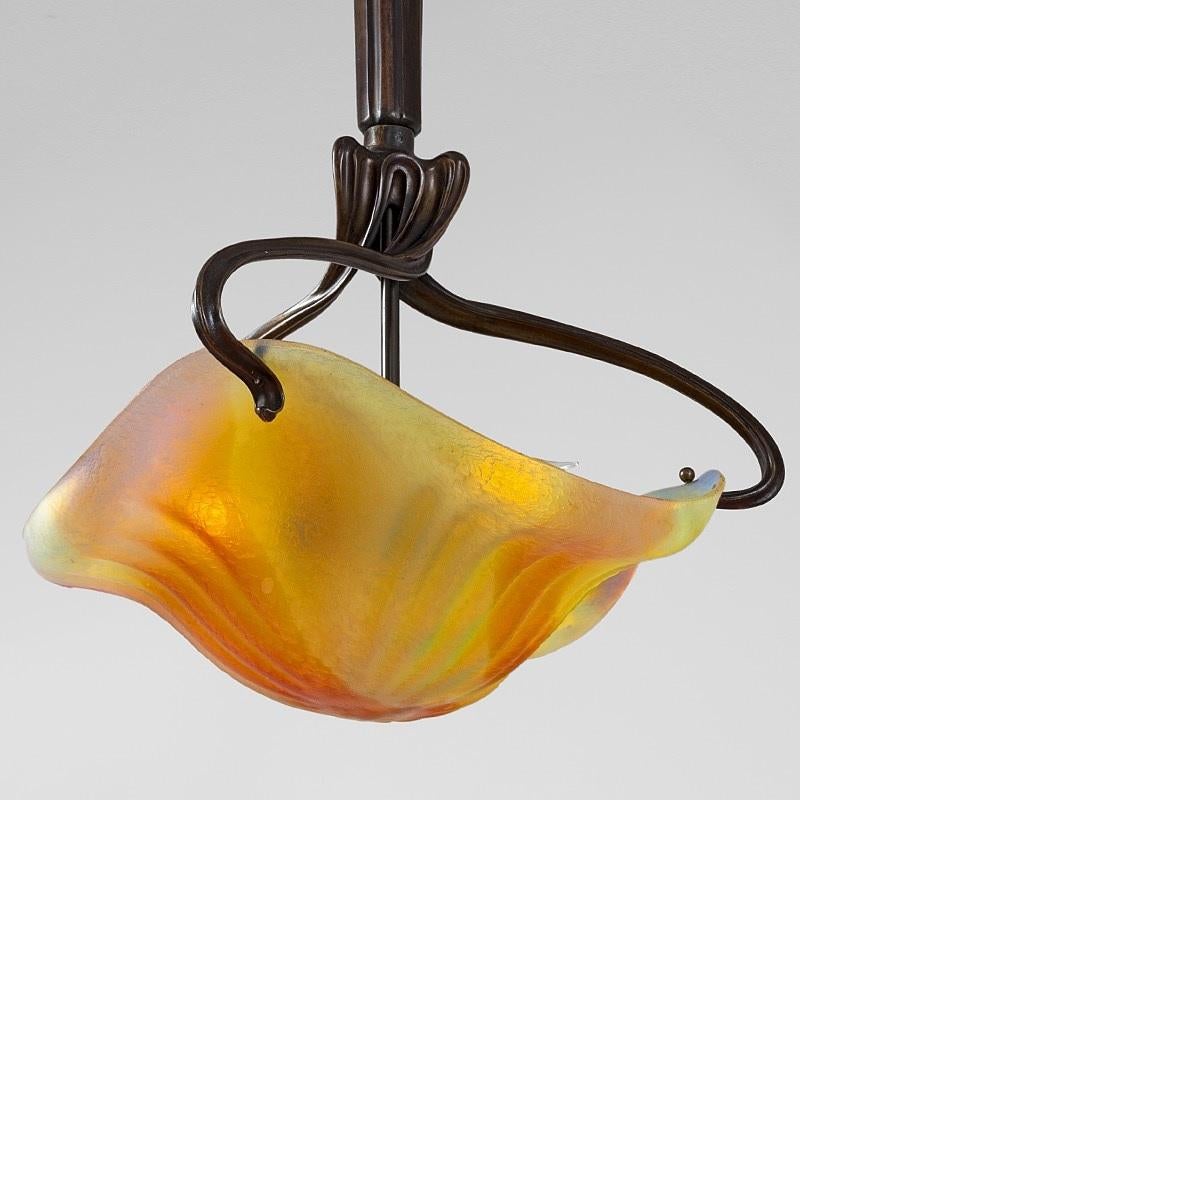 This uniquely-shaped French Art Nouveau chandelier, a collaboration by Louis Majorelle and Daum Nancy, features a glass shade—executed by Daum Nancy—has an abstractly floral, undulating design, rendered subtly in flowing autumnal colors of yellow,